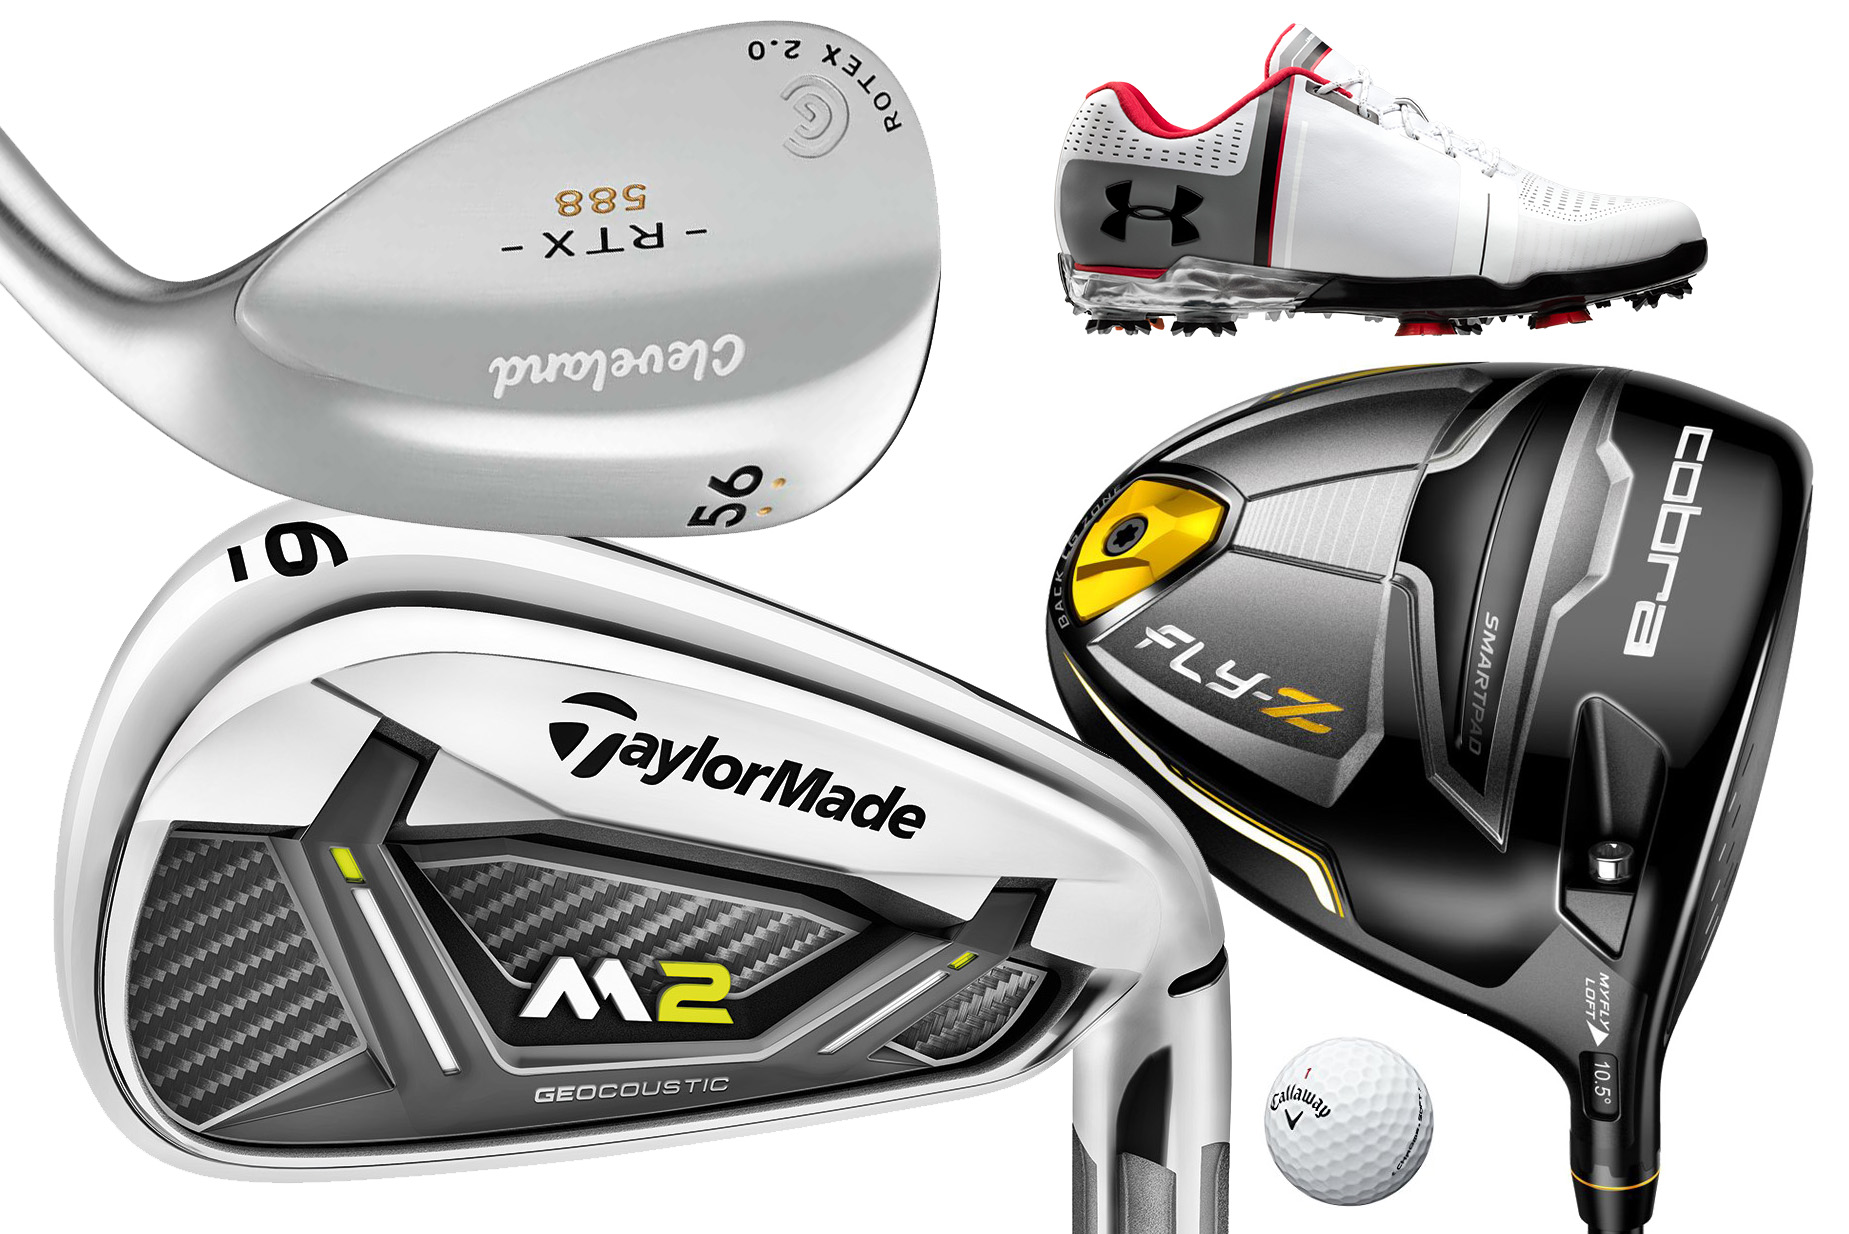 best golf clubs for the money